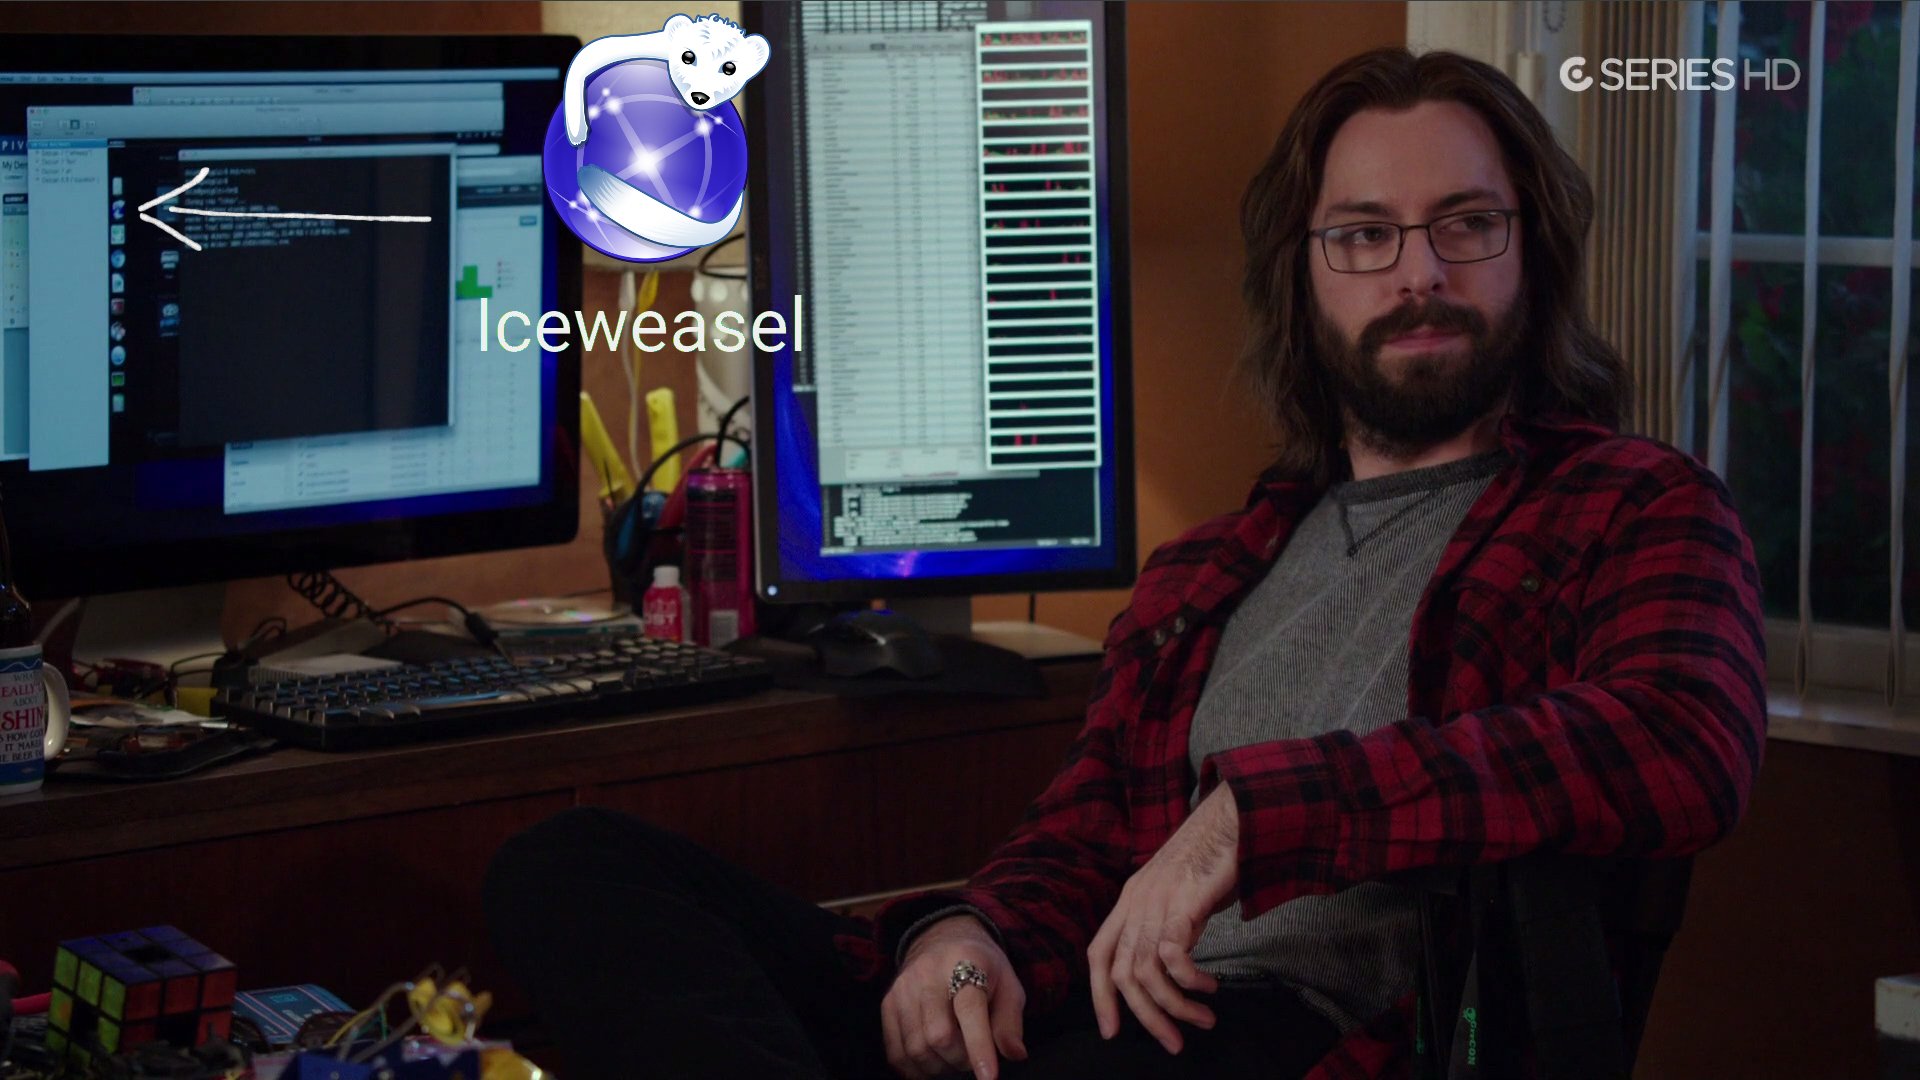 Adnan Hodzic you notice that Gilfoyle from Silicon Valley uses Debian Linux on his workstation?